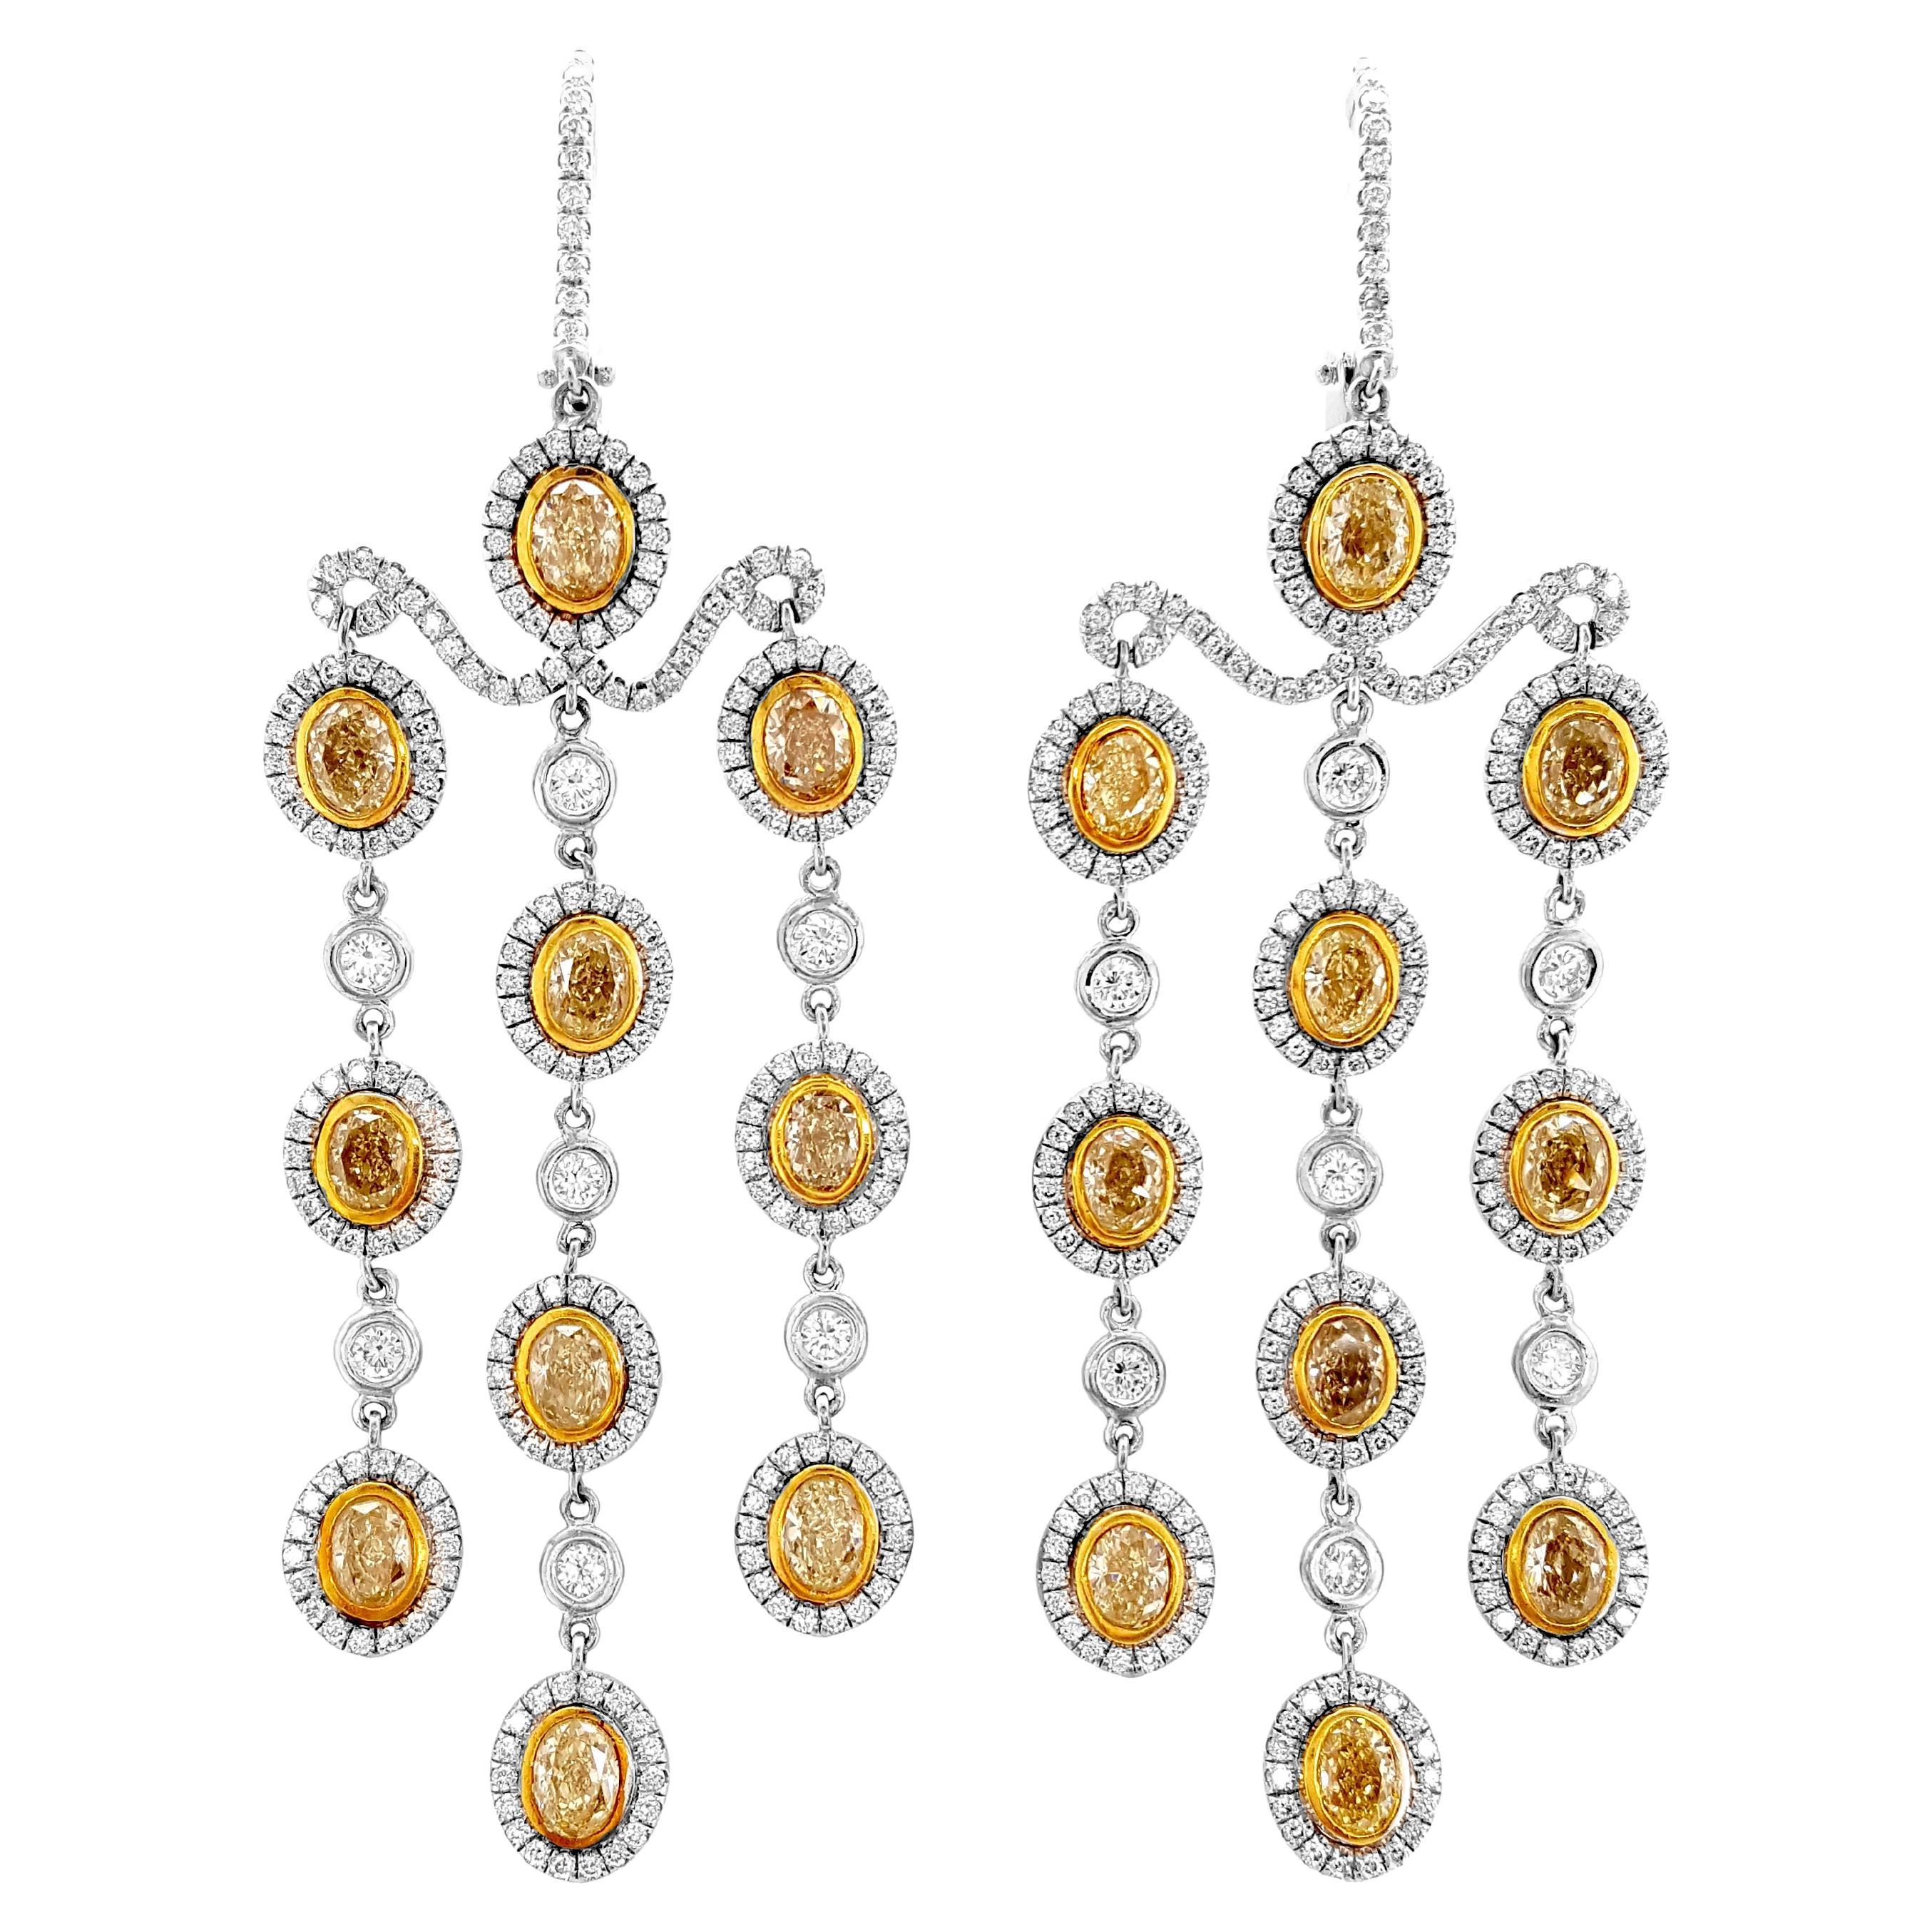 7 Carat Yellow and White Diamond Chandelier Drop Earrings Set In White Gold. For Sale